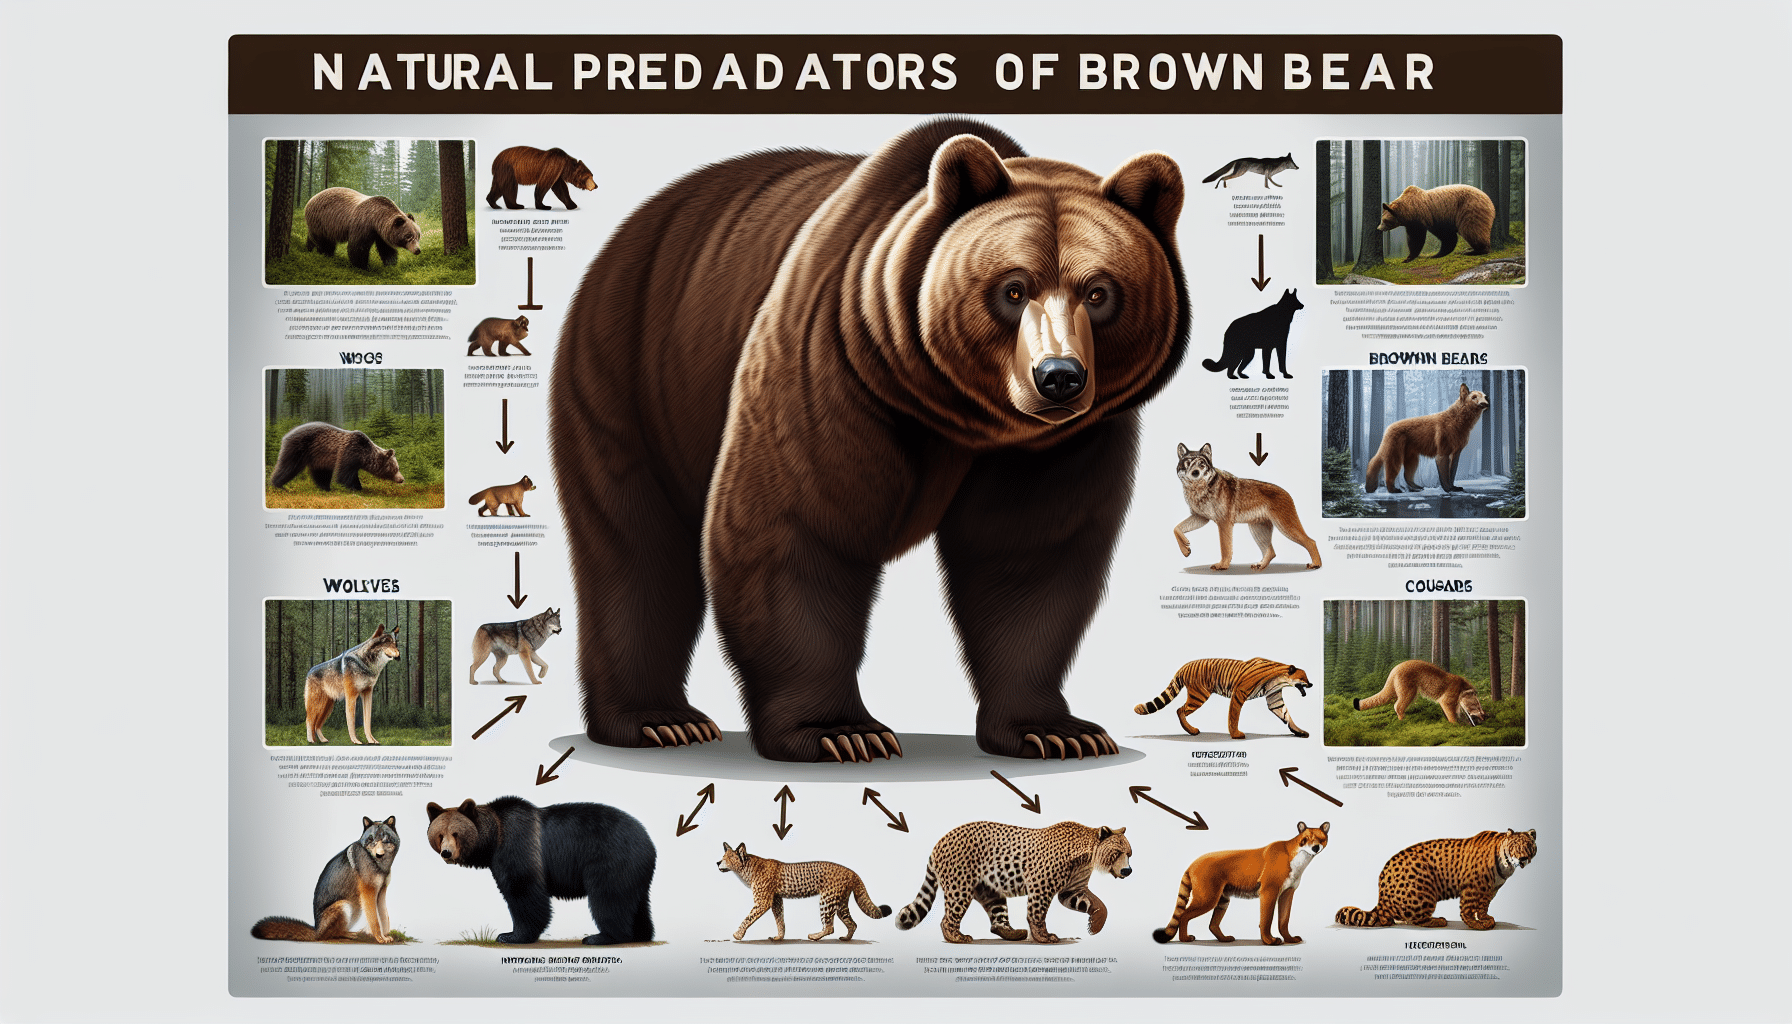 A detailed infographic presenting the natural predators of brown bears. On the bottom, a lifelike, full body depiction of a brown bear is present. Above it, images represent each predator with corresponding arrows pointing towards the bear. Include depictions of large predators such as bigger brown bears, and possibly wolves, cougars or tigers. Ensure the setting is a dense forest environment to provide context to their natural habitat. Strictly avoid inclusion of any human figures, text, brand names or logos in the depiction.